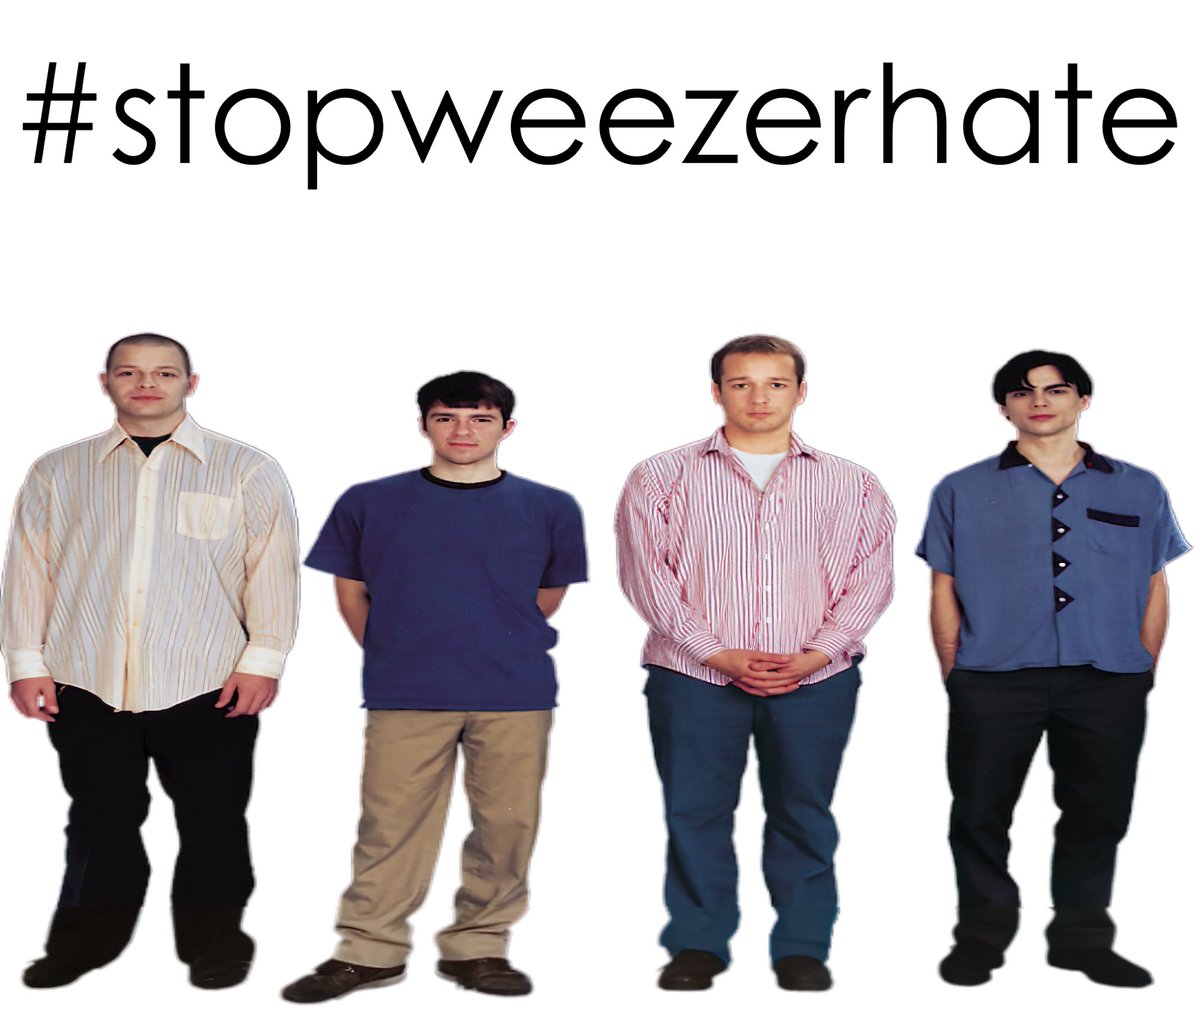 It’s time to speak up now!

Weezers are tired of being mocked 
Weezers are tired of being stereotyped 
Weezers are tired of the lie that “all weezers are virgins”

Let’s #StopWeezerHate